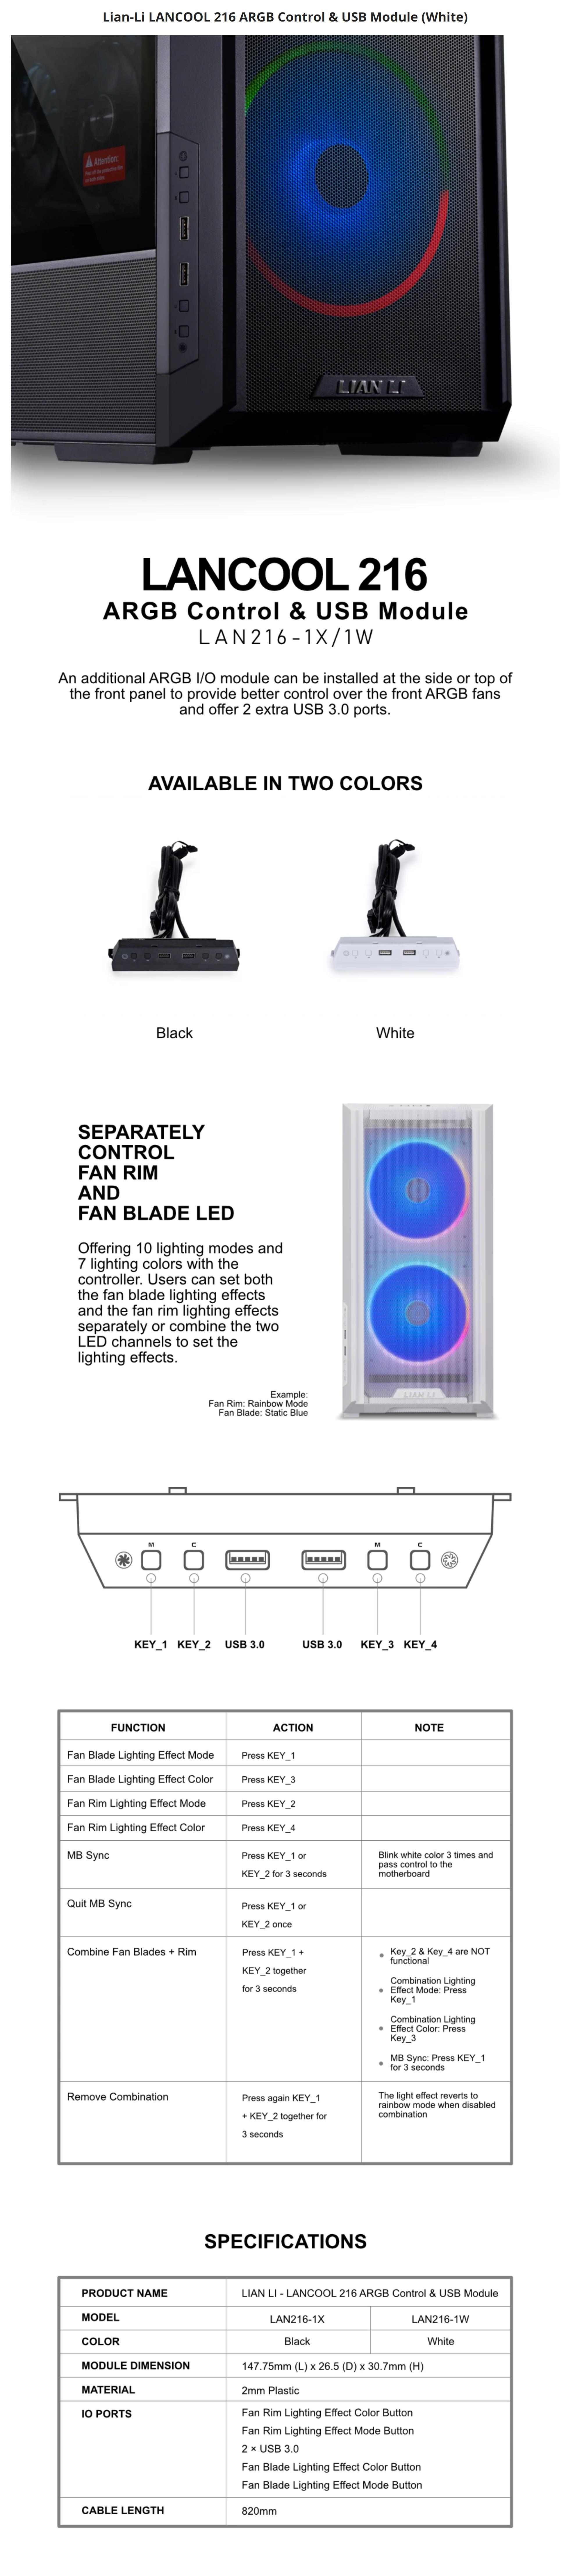 A large marketing image providing additional information about the product Lian Li Lancool 216 ARGB Controller & USB Module - White - Additional alt info not provided